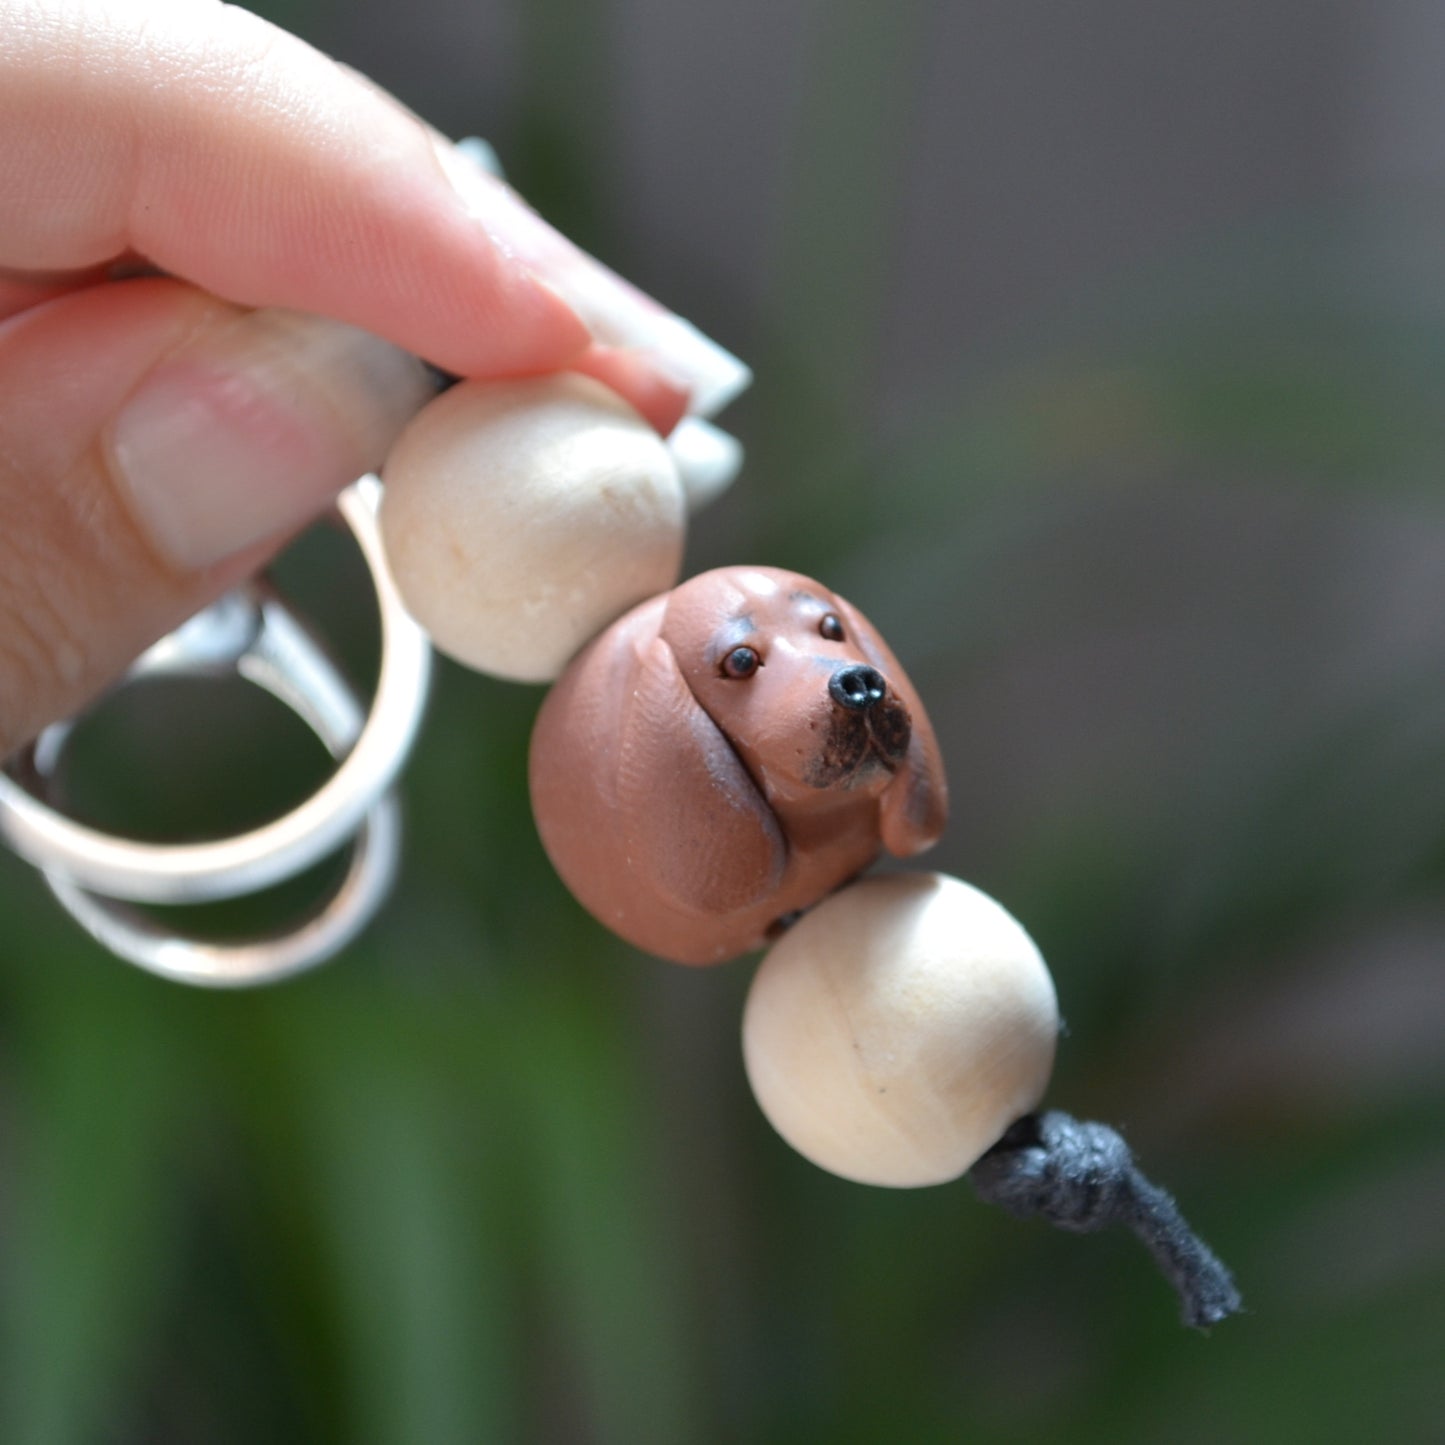 Handmade timber and polymer clay dachshund dog keychain being held in front of green palm plant background